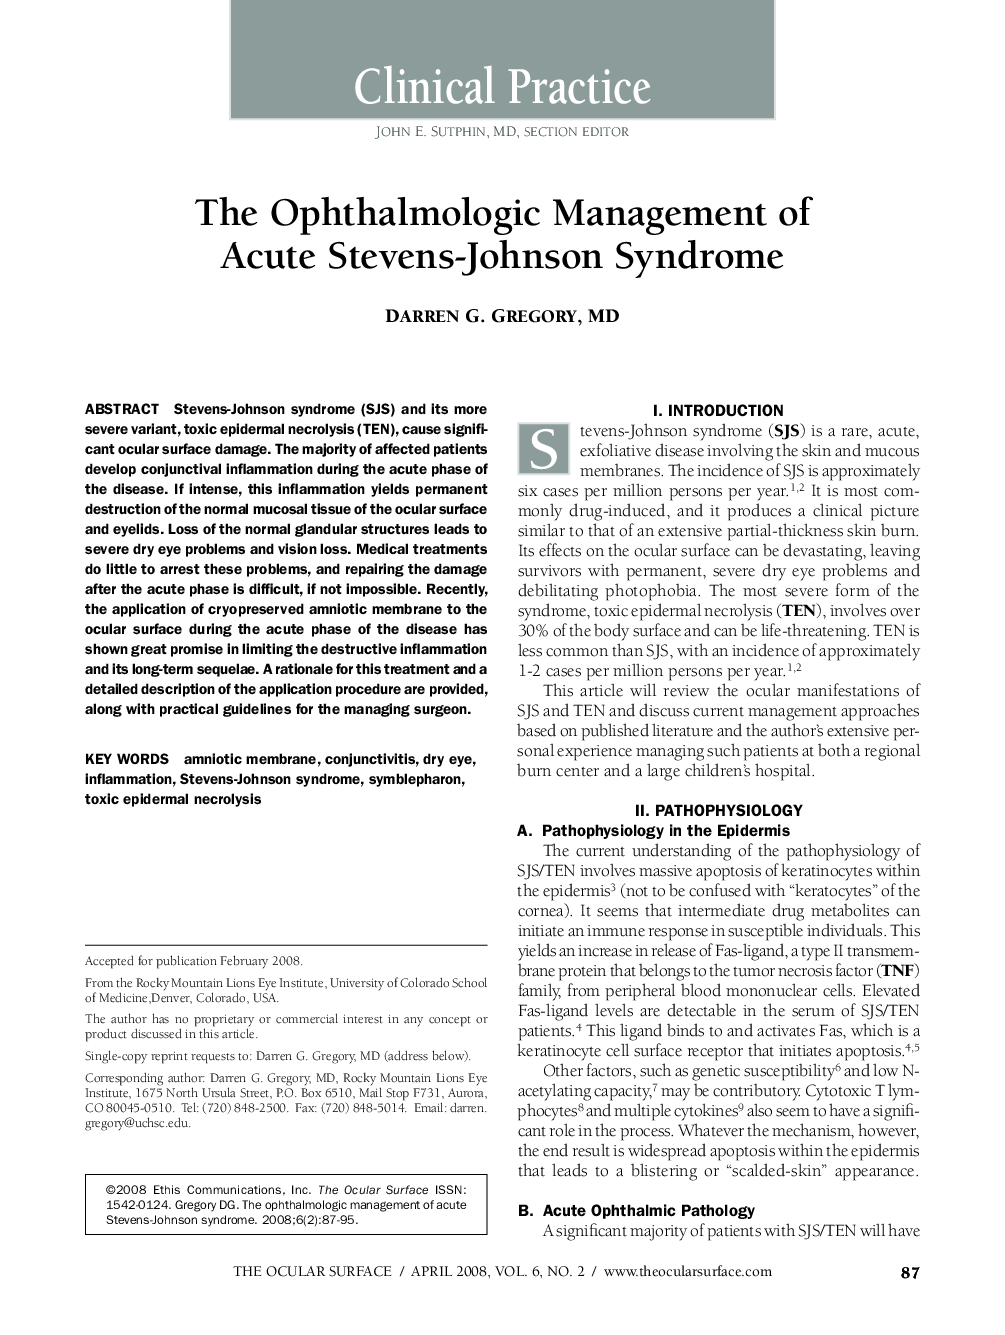 The ophthalmologic Management of Acute Stevens-Johnson Syndrome 